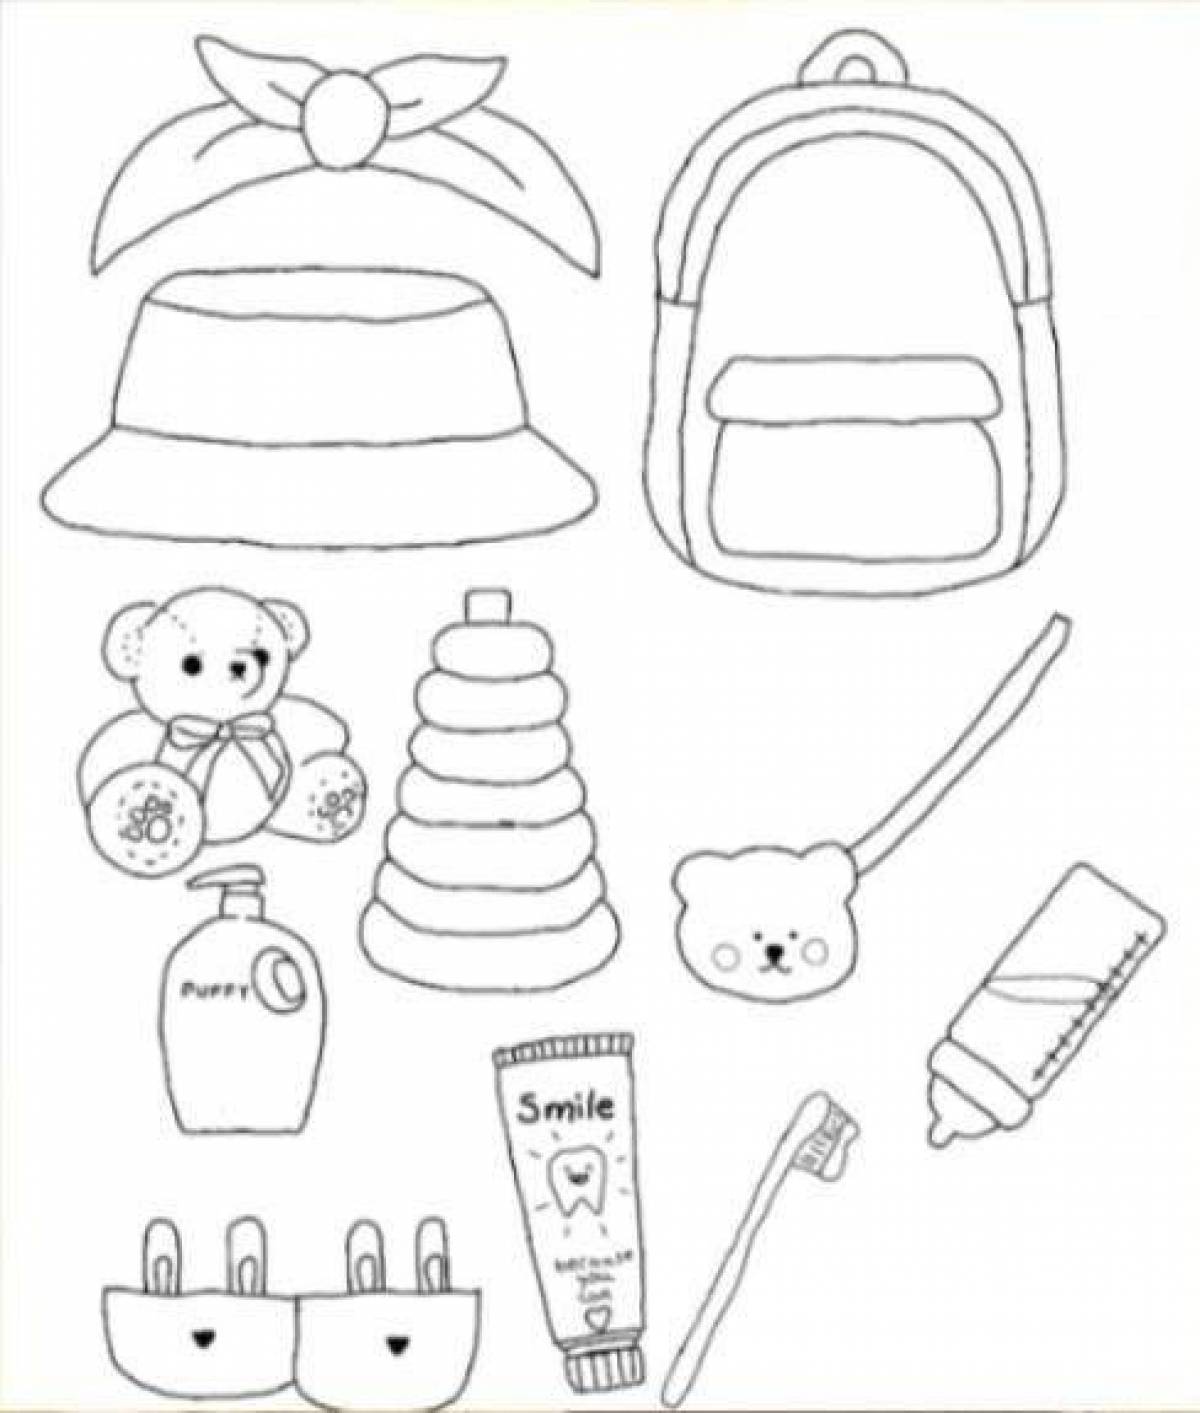 Dazzling cosmetics coloring page for lalafanfan duck